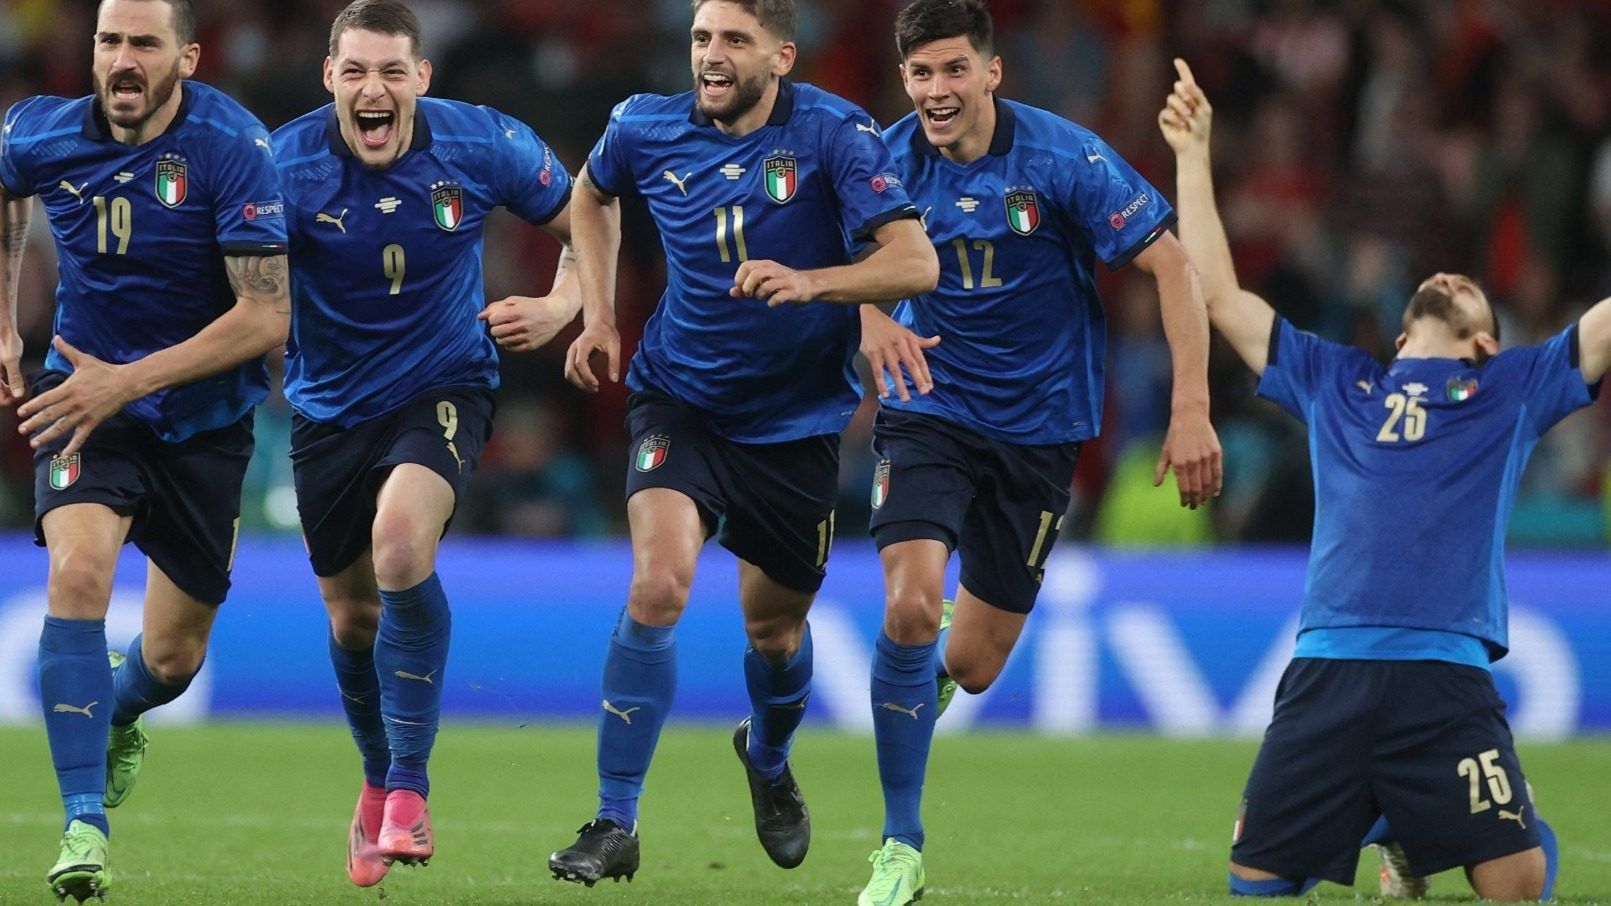 How many times have Italy won the UEFA Euro Cup? Know Italy's record in European Championship final matches